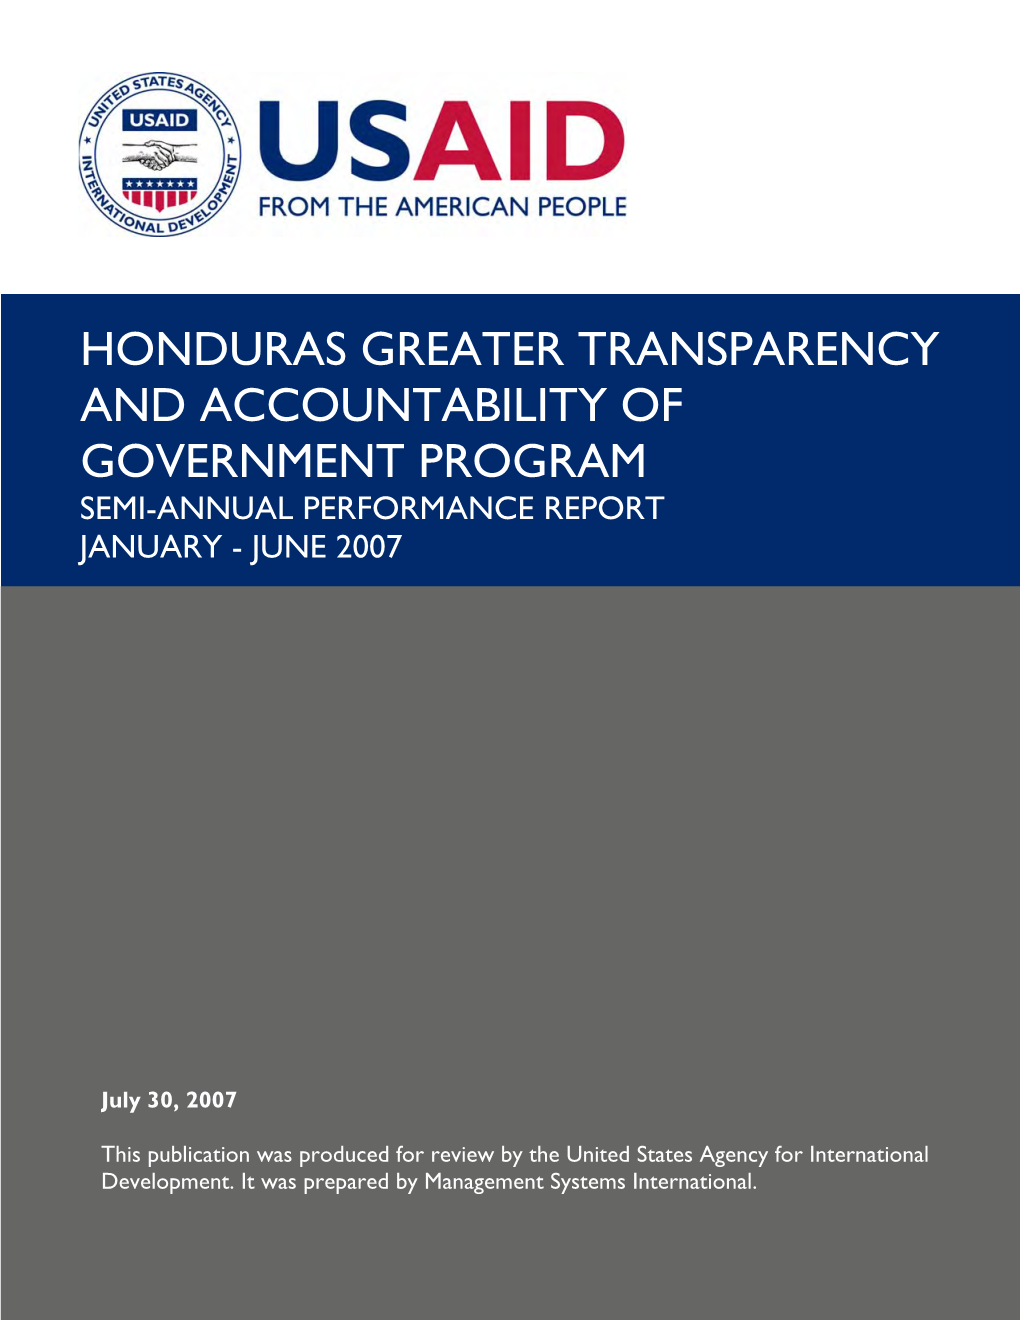 Honduras Greater Transparency and Accountability of Government Program Semi-Annual Performance Report January - June 2007